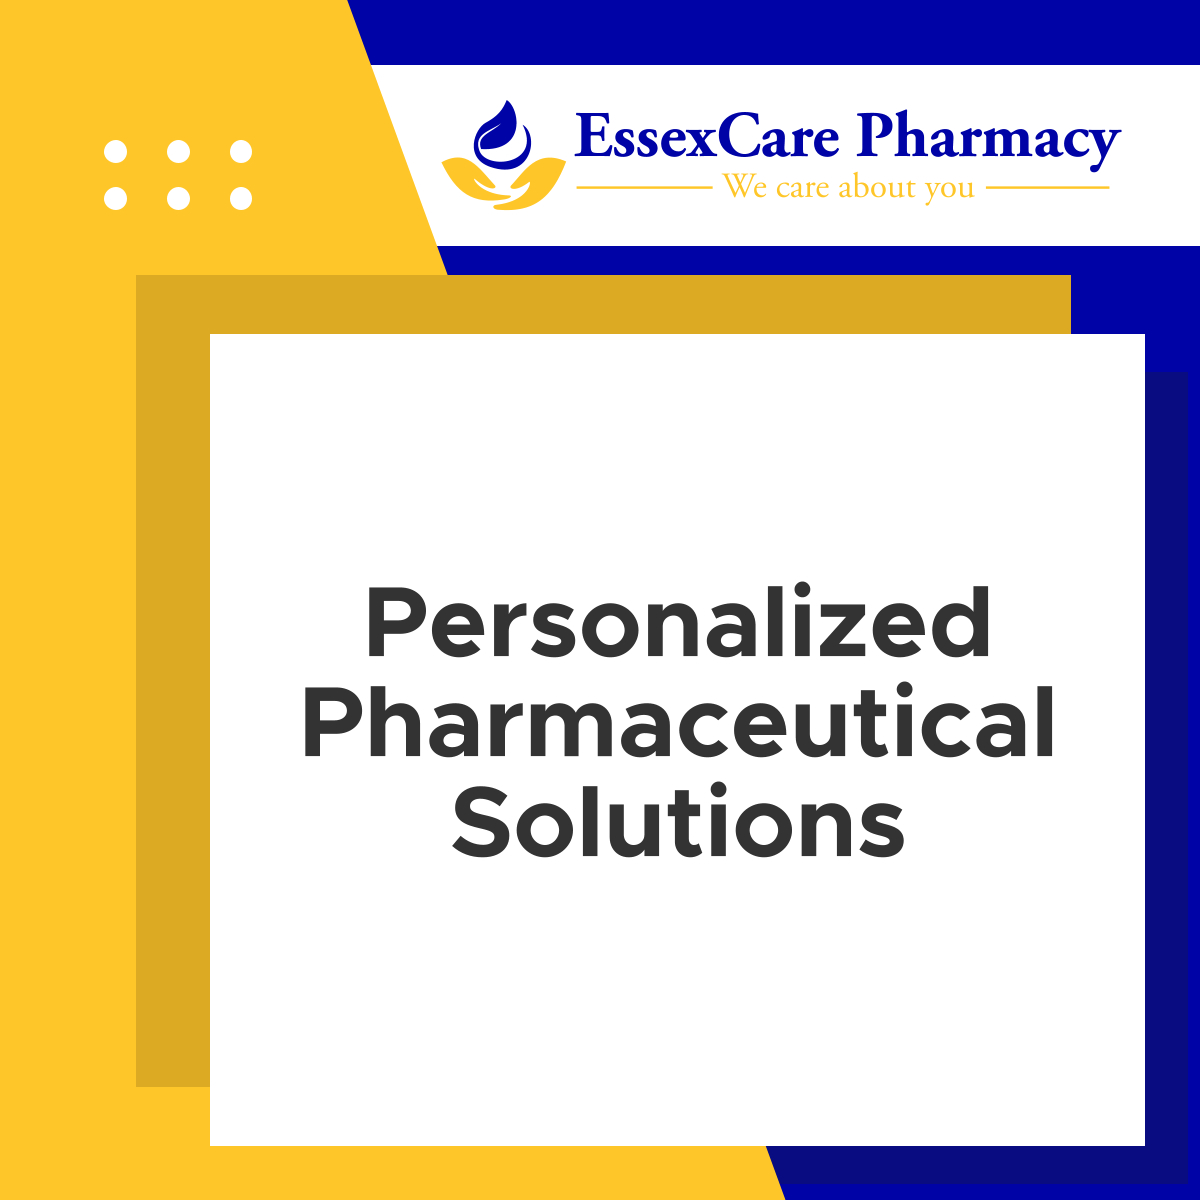 Patients have diverse pharmaceutical needs due to their medical conditions and health status. That is why we provide solutions to fit every client’s needs.

#PharmaceuticalSolutions #RetailPharmacy #LodiNJ